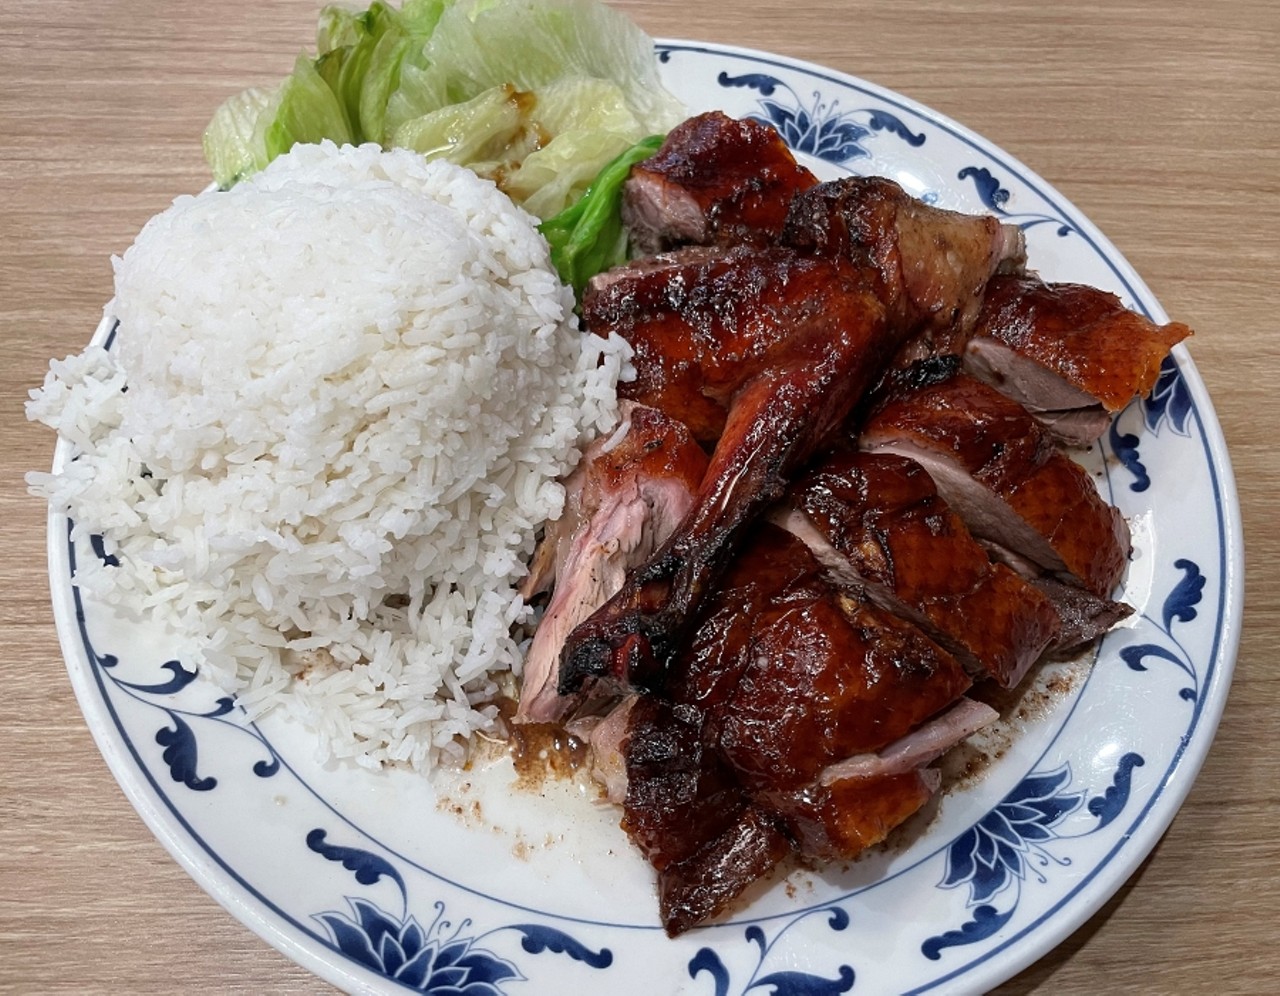  Oriental House 
4302 Shelbyville Road
Review:  &#147;Oriental House Returns&#133; And Is Just As Good As Ever&#148; 
Recommended: &#147;One of our favorite dishes here is a simple but memorable plate of roasted duck with steamed rice. A sizable duck thigh quarter had been coated with hoisin sauce and anise-scented five-spice and roasted to a dark mahogany color, then chopped crosswise into chunks. They were served with a bit of lettuce that had been quickly softened in duck broth, with a generous scoop of medium-grain white rice. The skin was roasted and firm, not crackling crisp, with a thick layer of juicy fat cloaking rich, succulent, tender dark duck meat.&#148;
Photo by Robin Garr